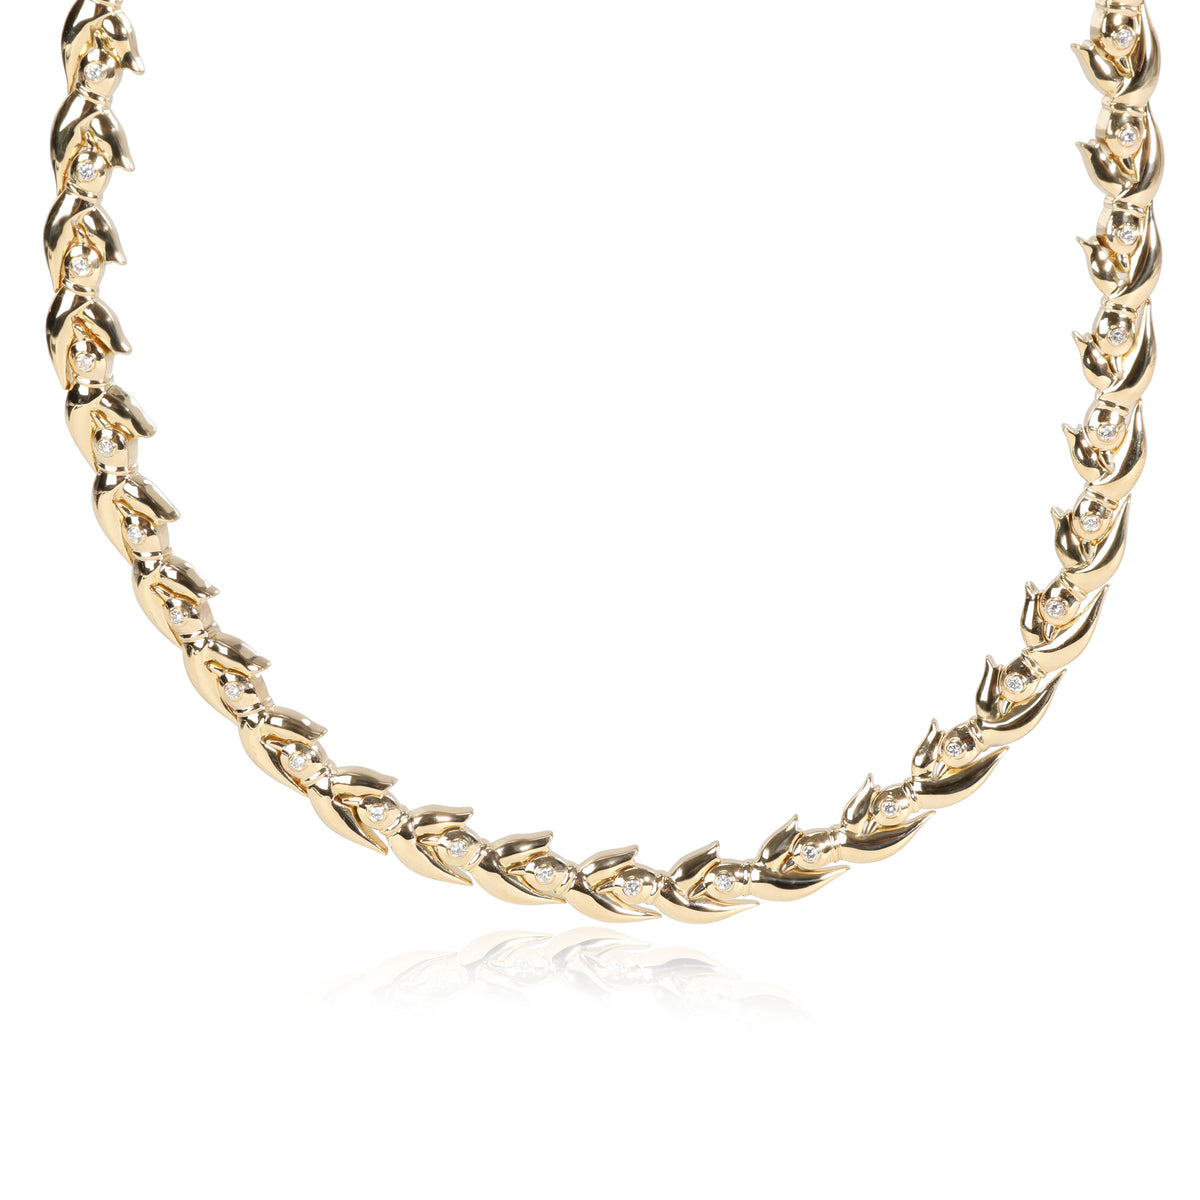 Hennel Vintage 1960's Diamond Choker Necklace in 18k Yellow Gold 0.5 CTW